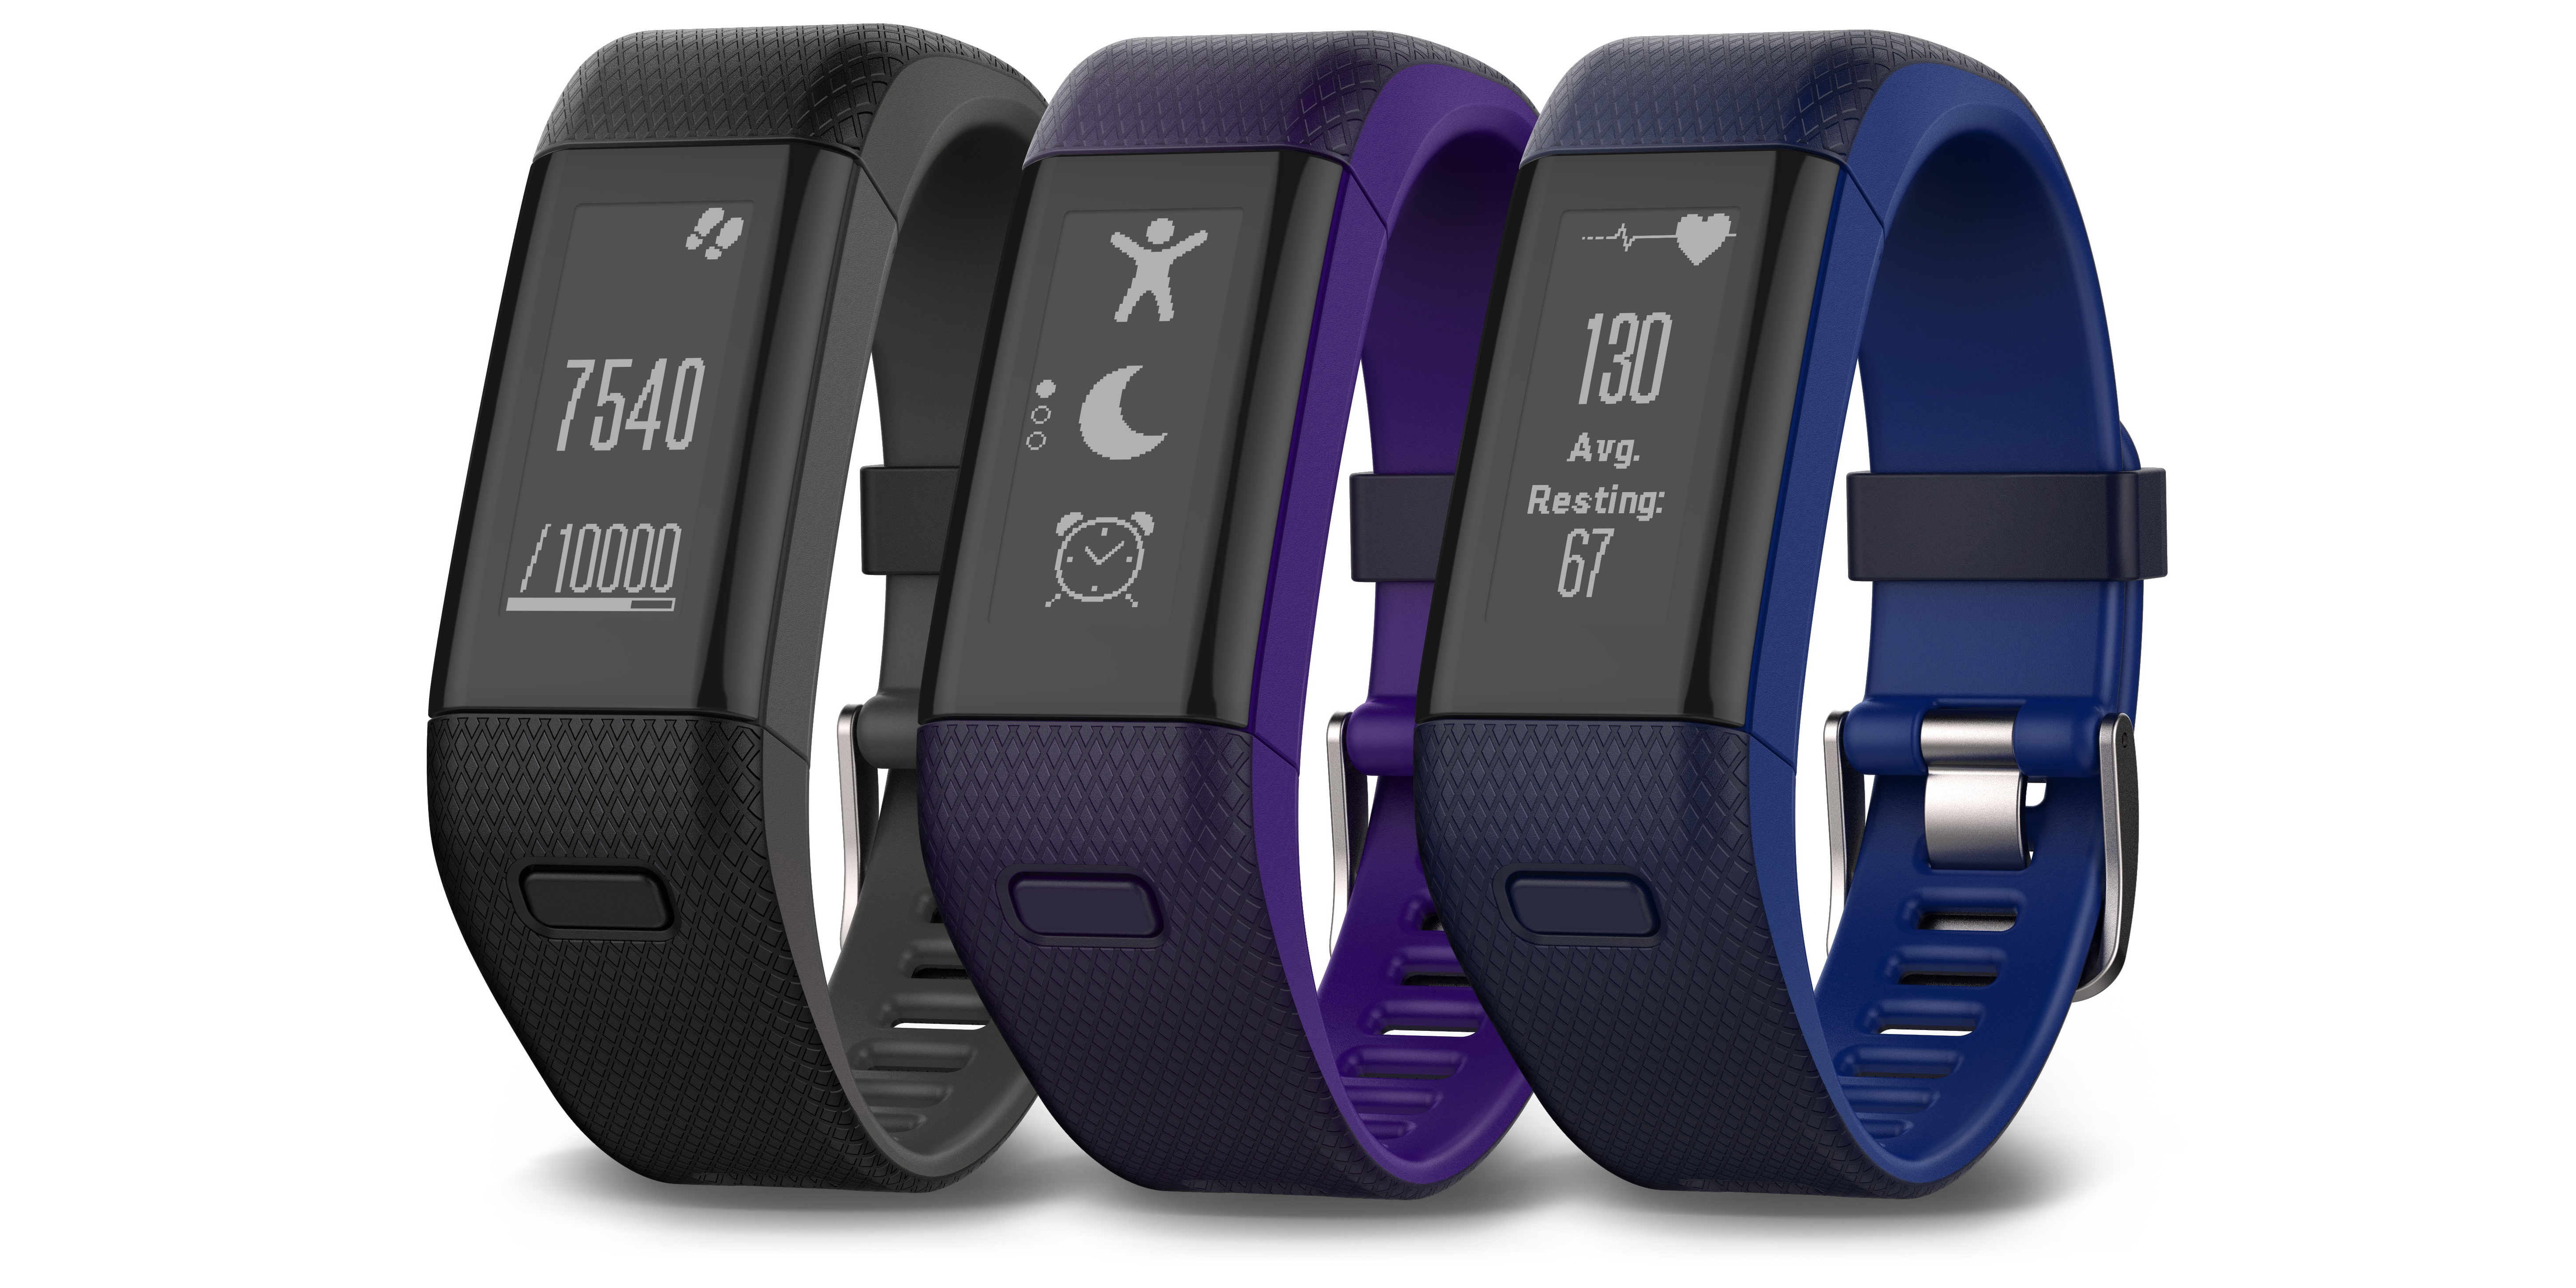 Catena rechter helaas Garmin's new vívosmart HR+ opts for GPS-tracking and heart rate monitoring  over battery life